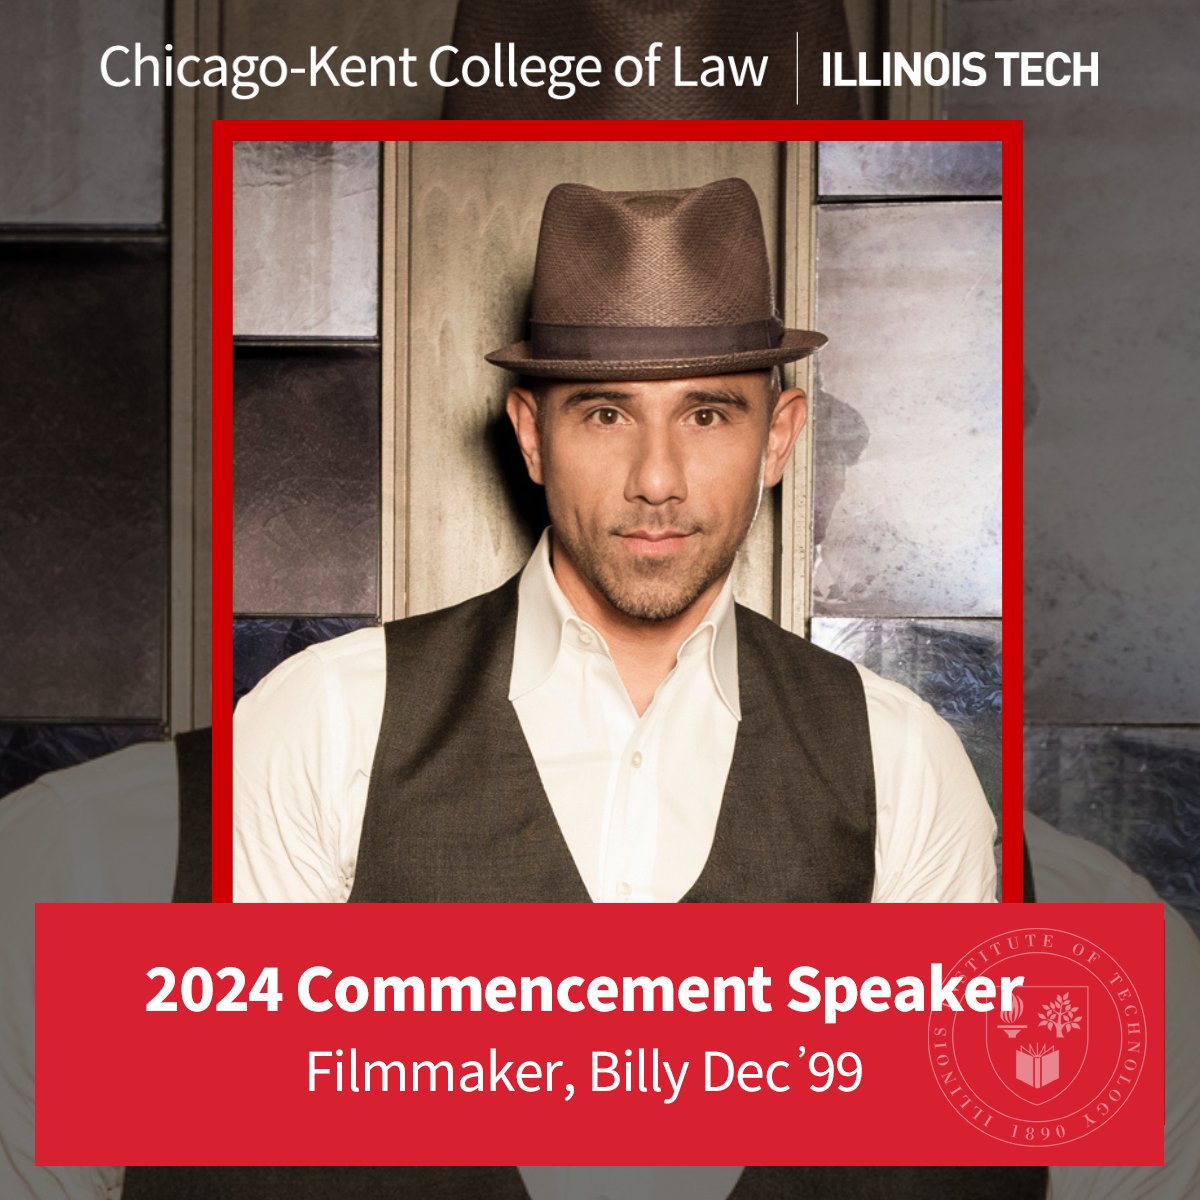 We're thrilled to announce that we selected alumnus @BillyDec'99 as this year's commencement speaker! Join us as we celebrate this exciting moment with our graduates. We hope his words and achievements inspire you as you move onto the next step in your careers. 🎓